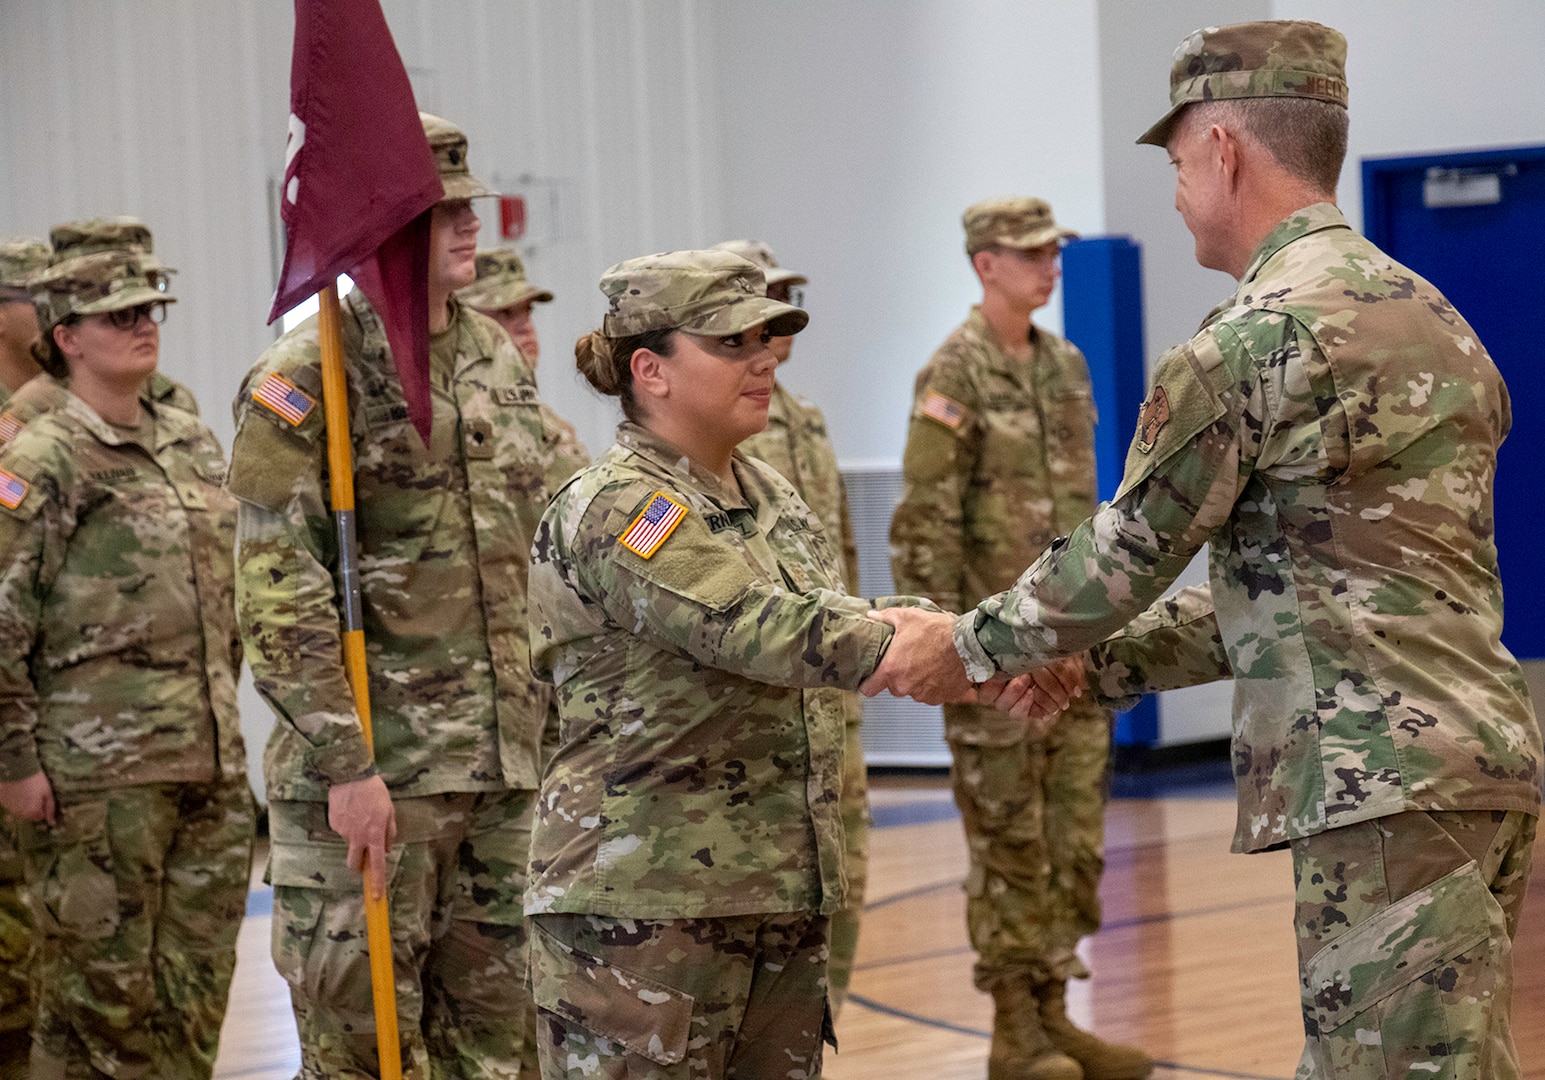 Maj. Gen. Rich Neely, the Adjutant General of Illinois and Commander of the Illinois National Guard, shakes hands with Maj. Karen Hernandez, of Bensenville, Commander, 709th Medical Company Area Support, based in Bartonville, after the deployment ceremony Aug. 6 at Monroe Elementary School in Peoria, Illinois.